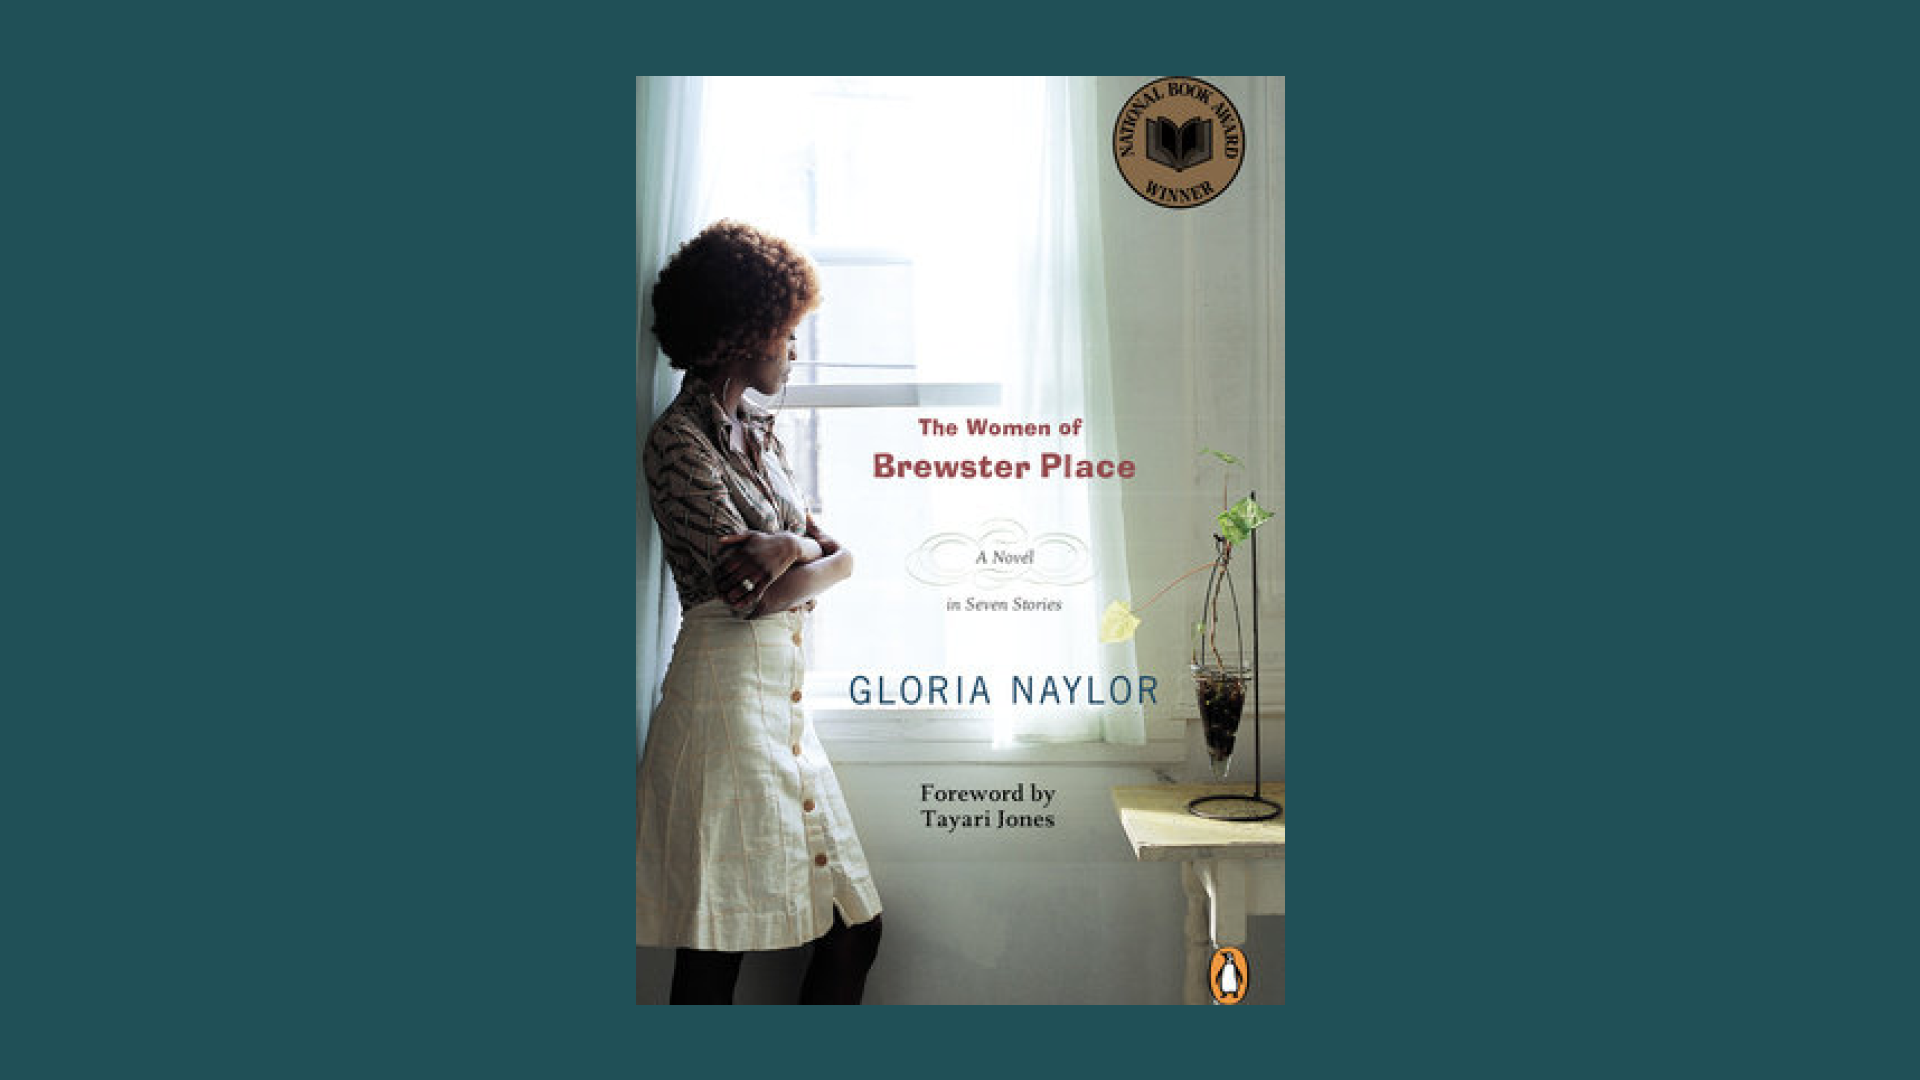 “The Women of Brewster Place” by Gloria Naylor